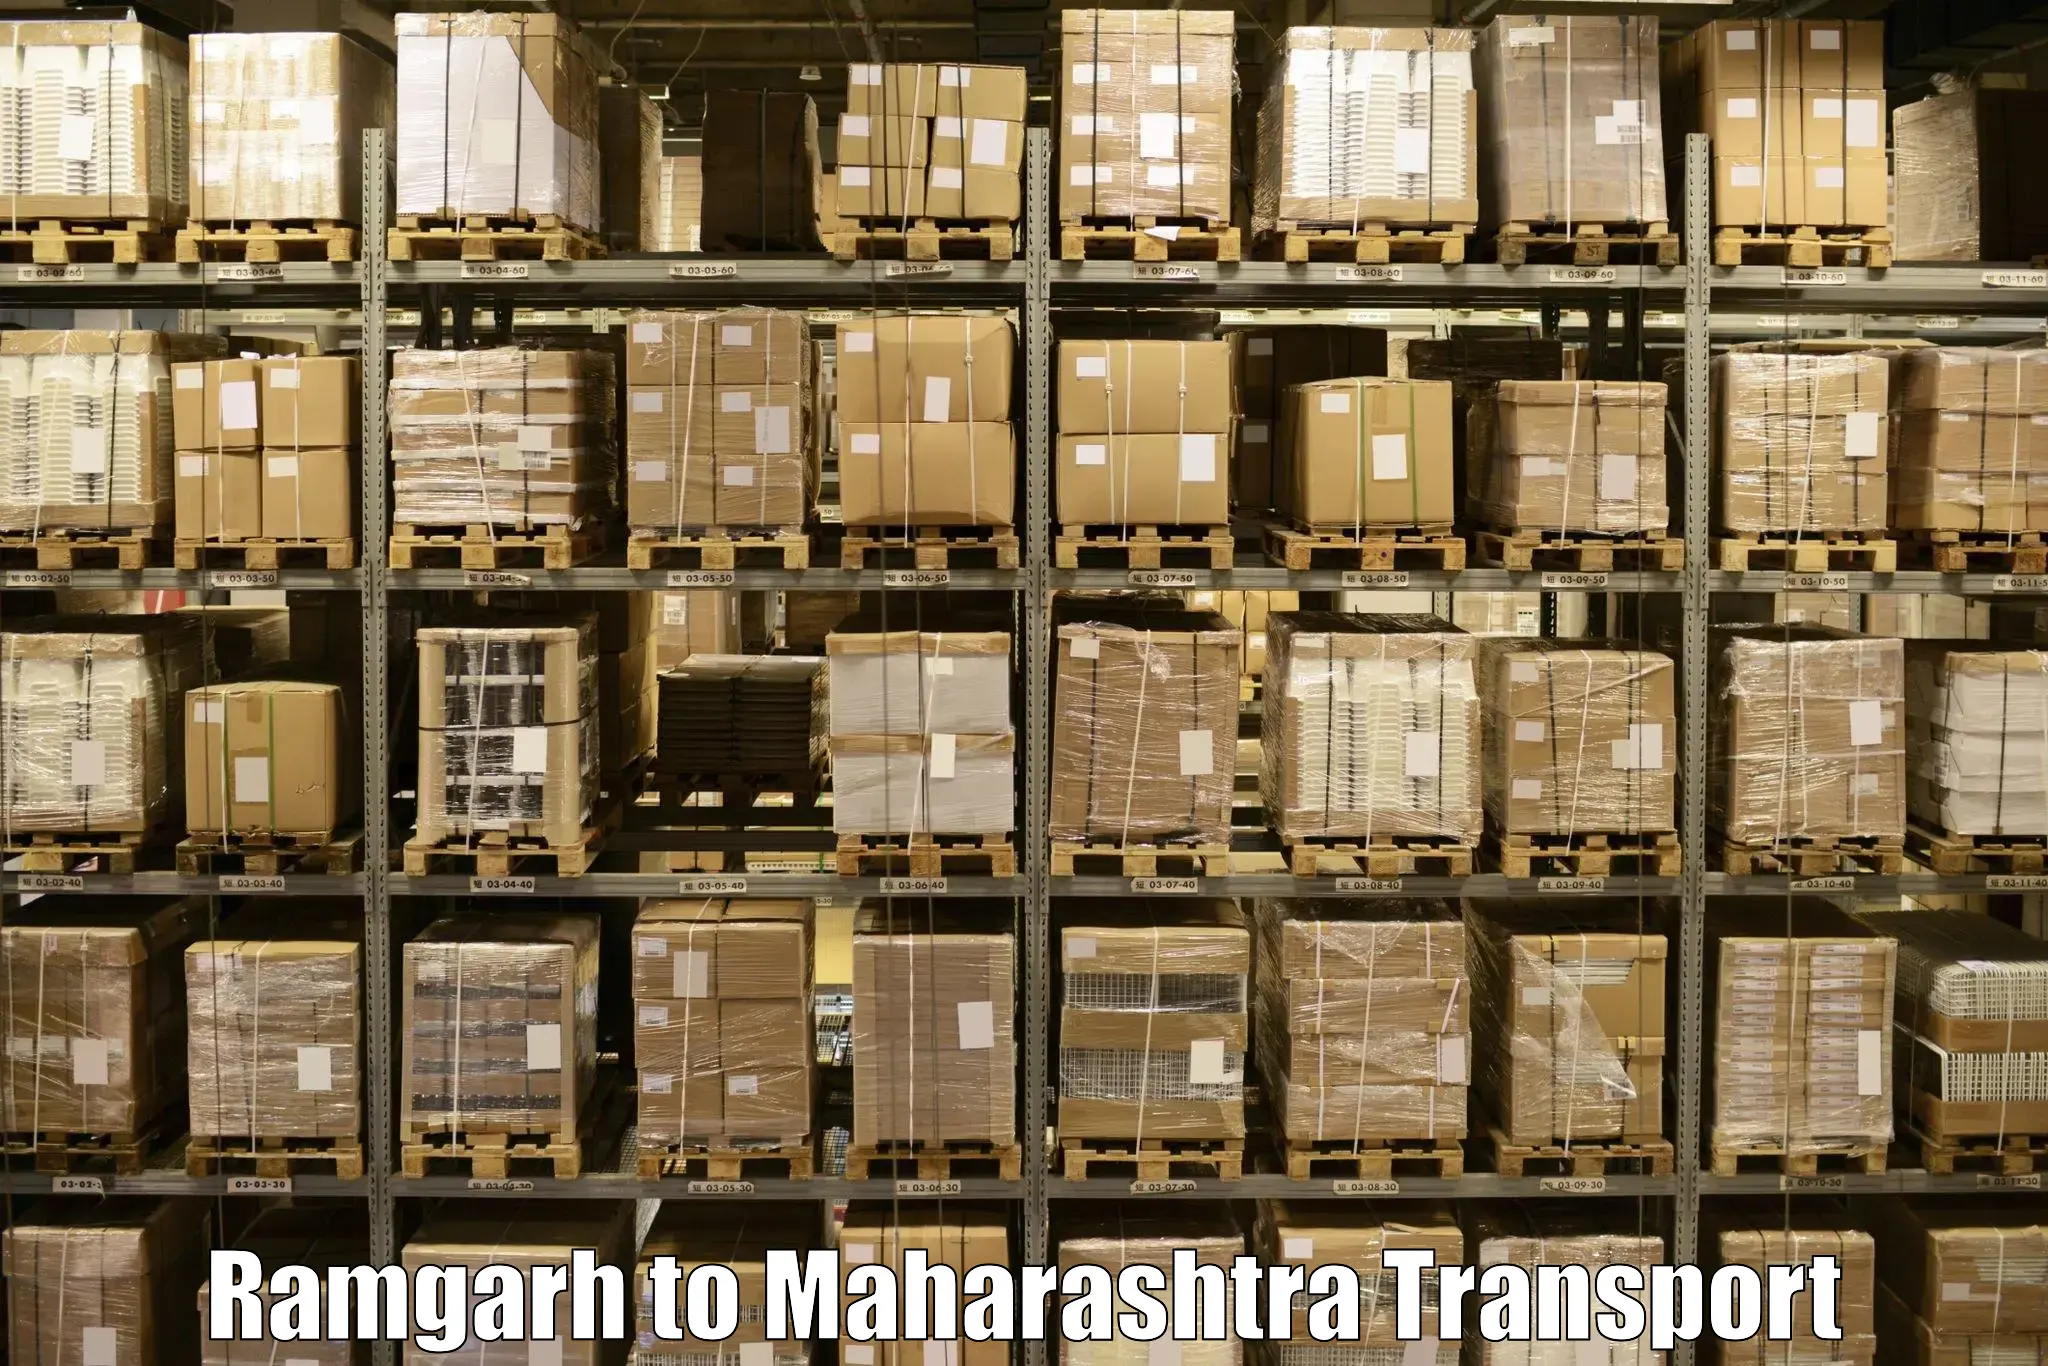 Container transport service in Ramgarh to Aurangabad